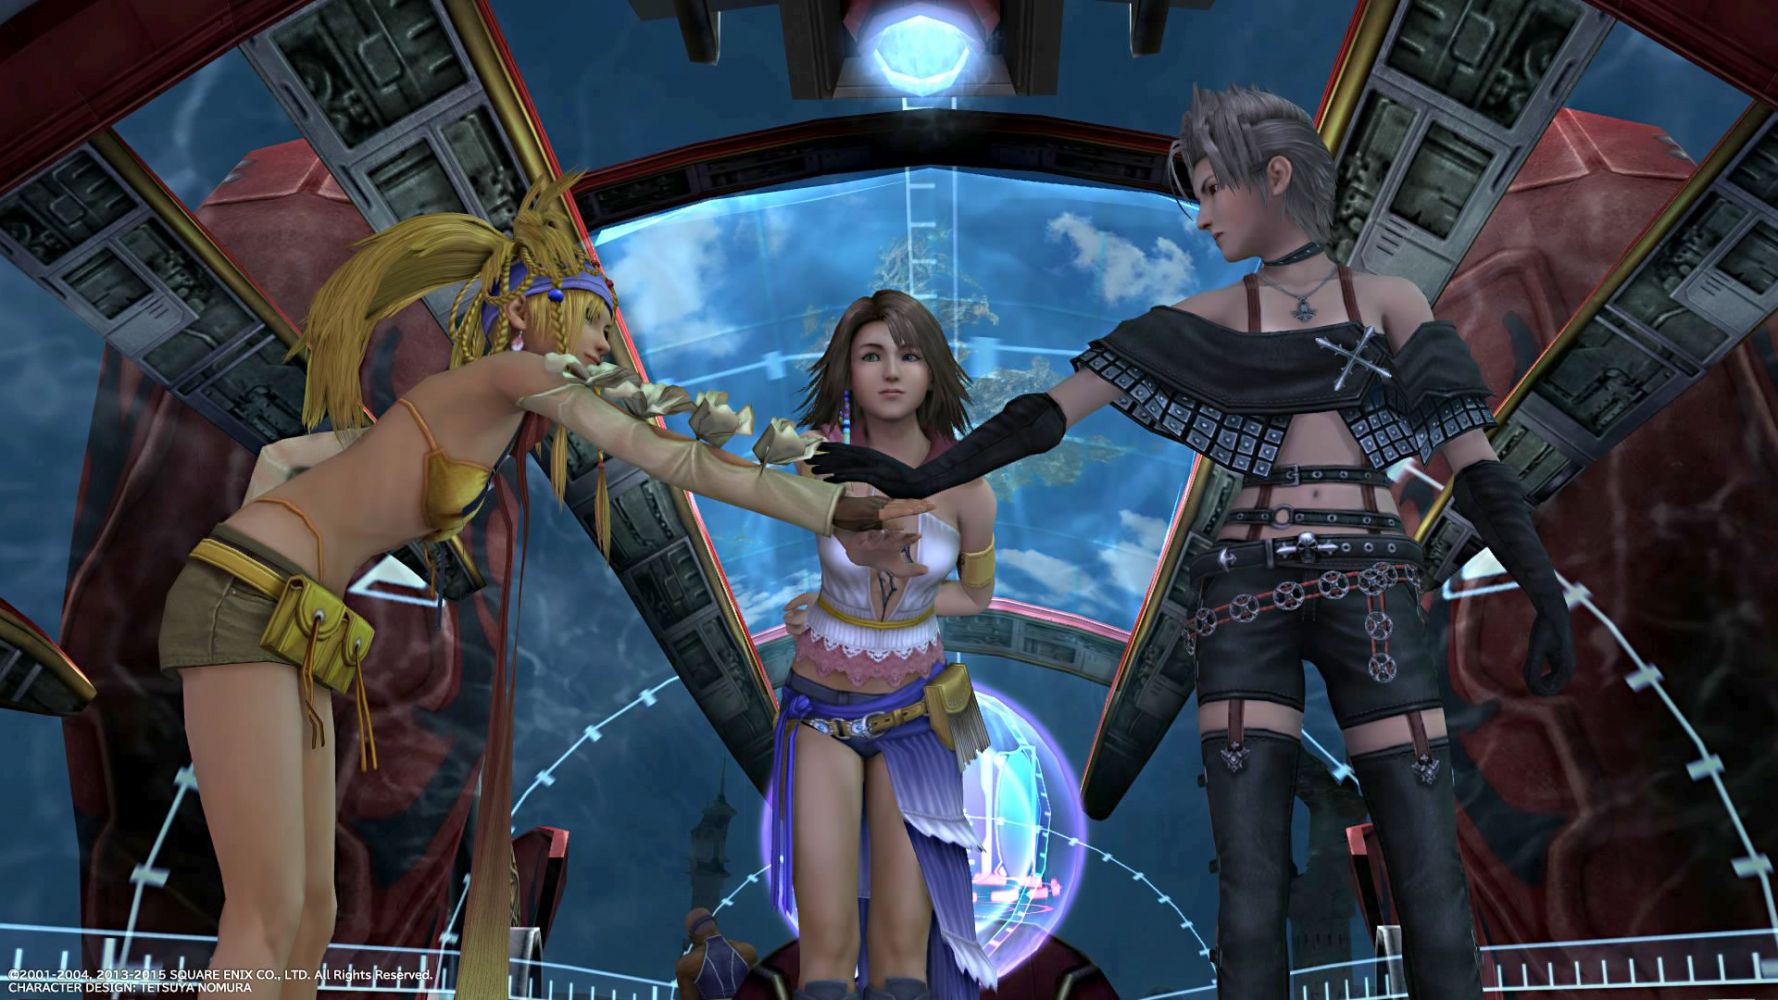 download final fantasy x and x 2 for free